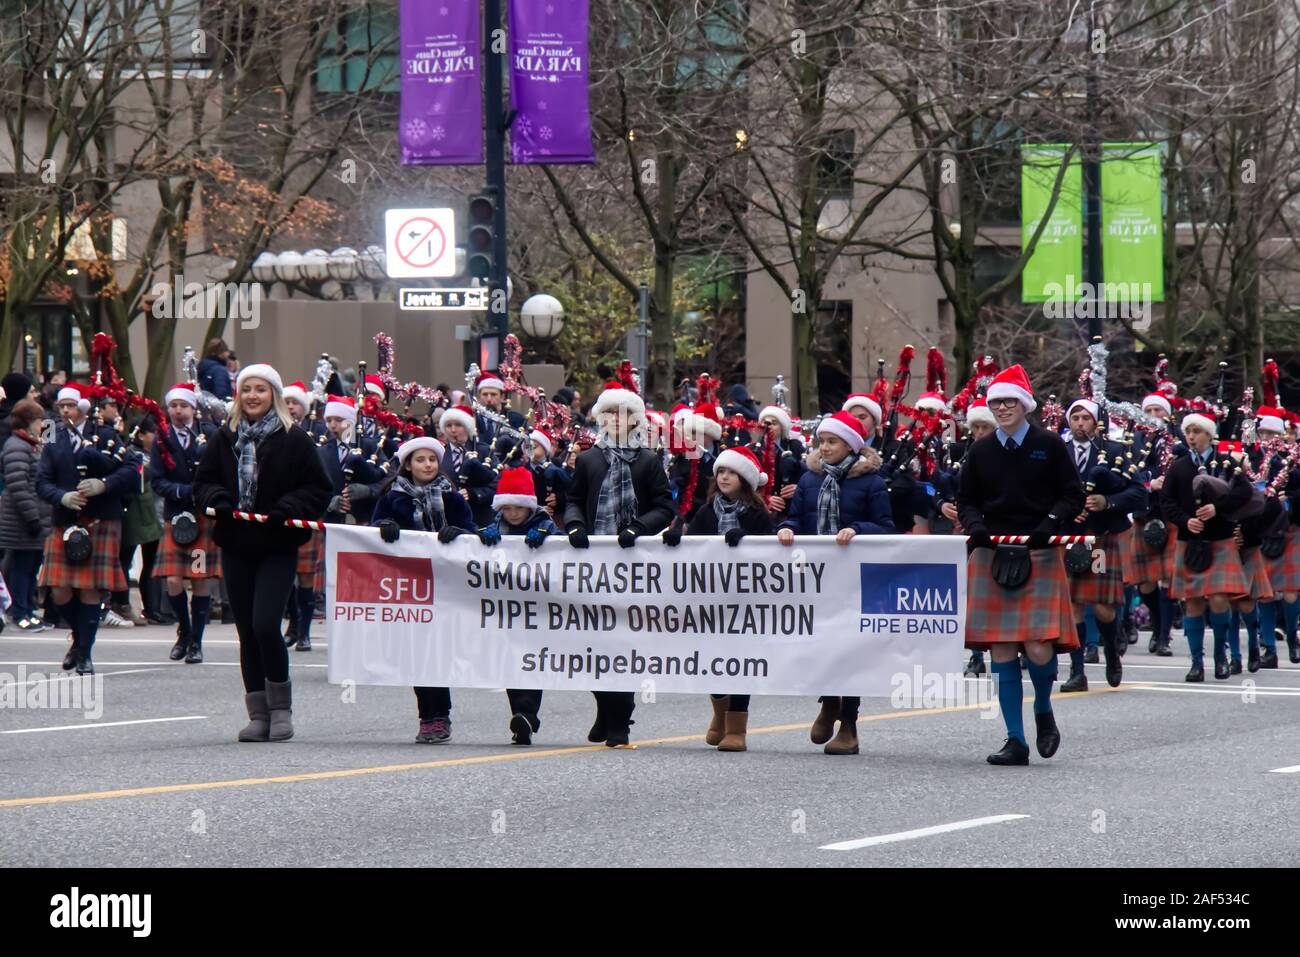 Vancouver, Canada - Dec 1, 2019: A Group of people from Simon Fraser University Pipe Band Organization takes part in the annual Santa Claus Parade Stock Photo